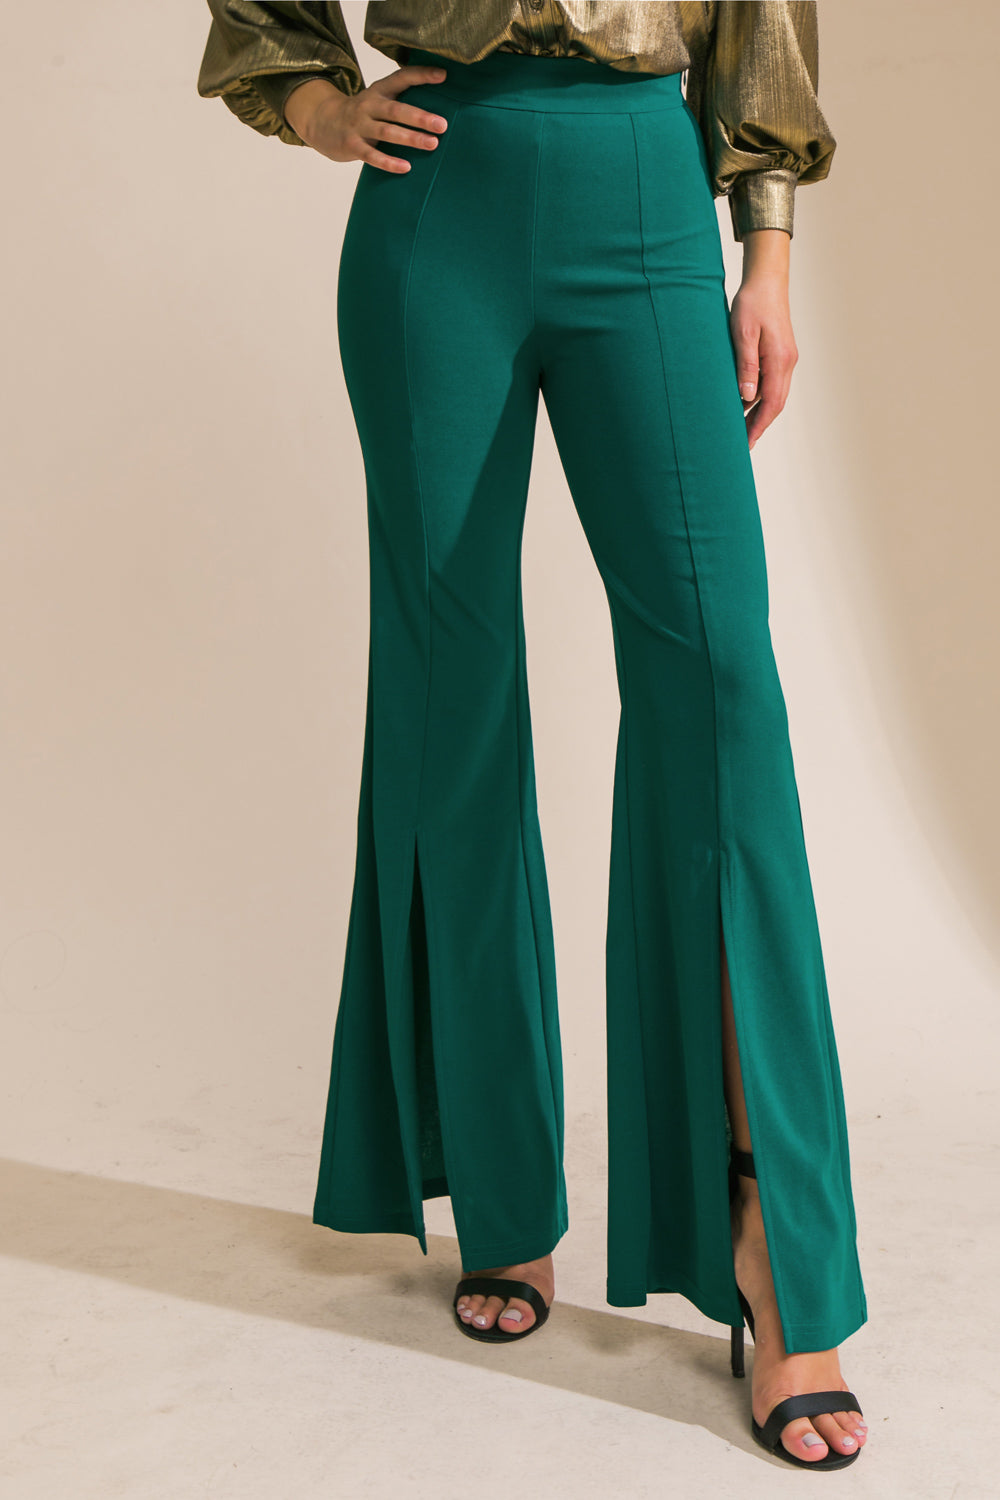 HEY DARLING WOVEN FLARE PANTS